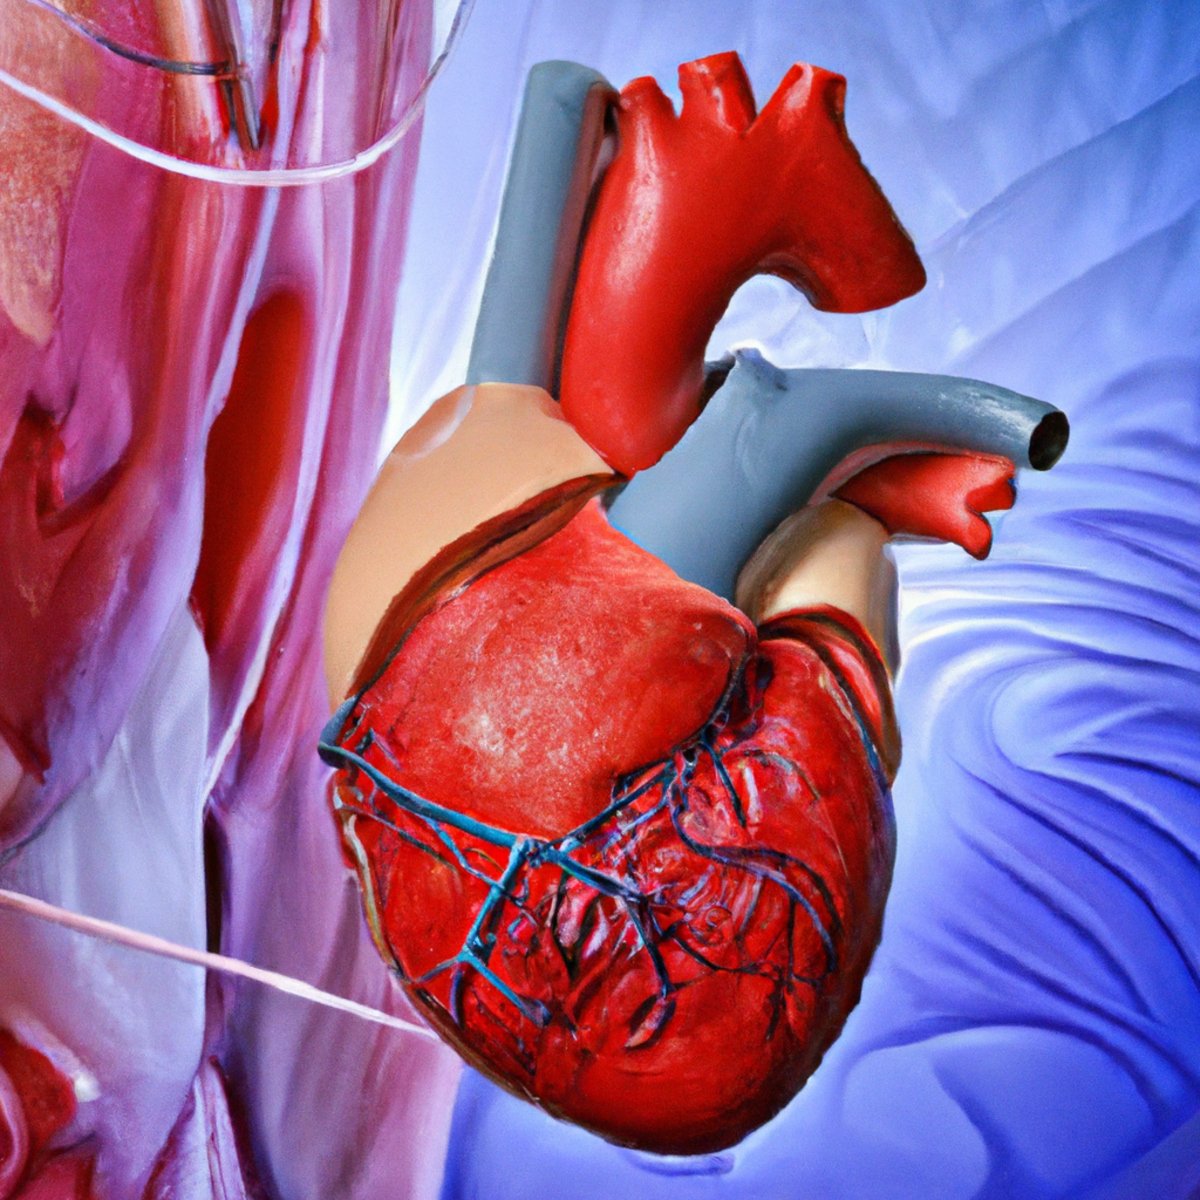 Close-up of lifelike heart model against medical backdrop, highlighting textures and colors, symbolizing Danon Disease's impact on heart health.